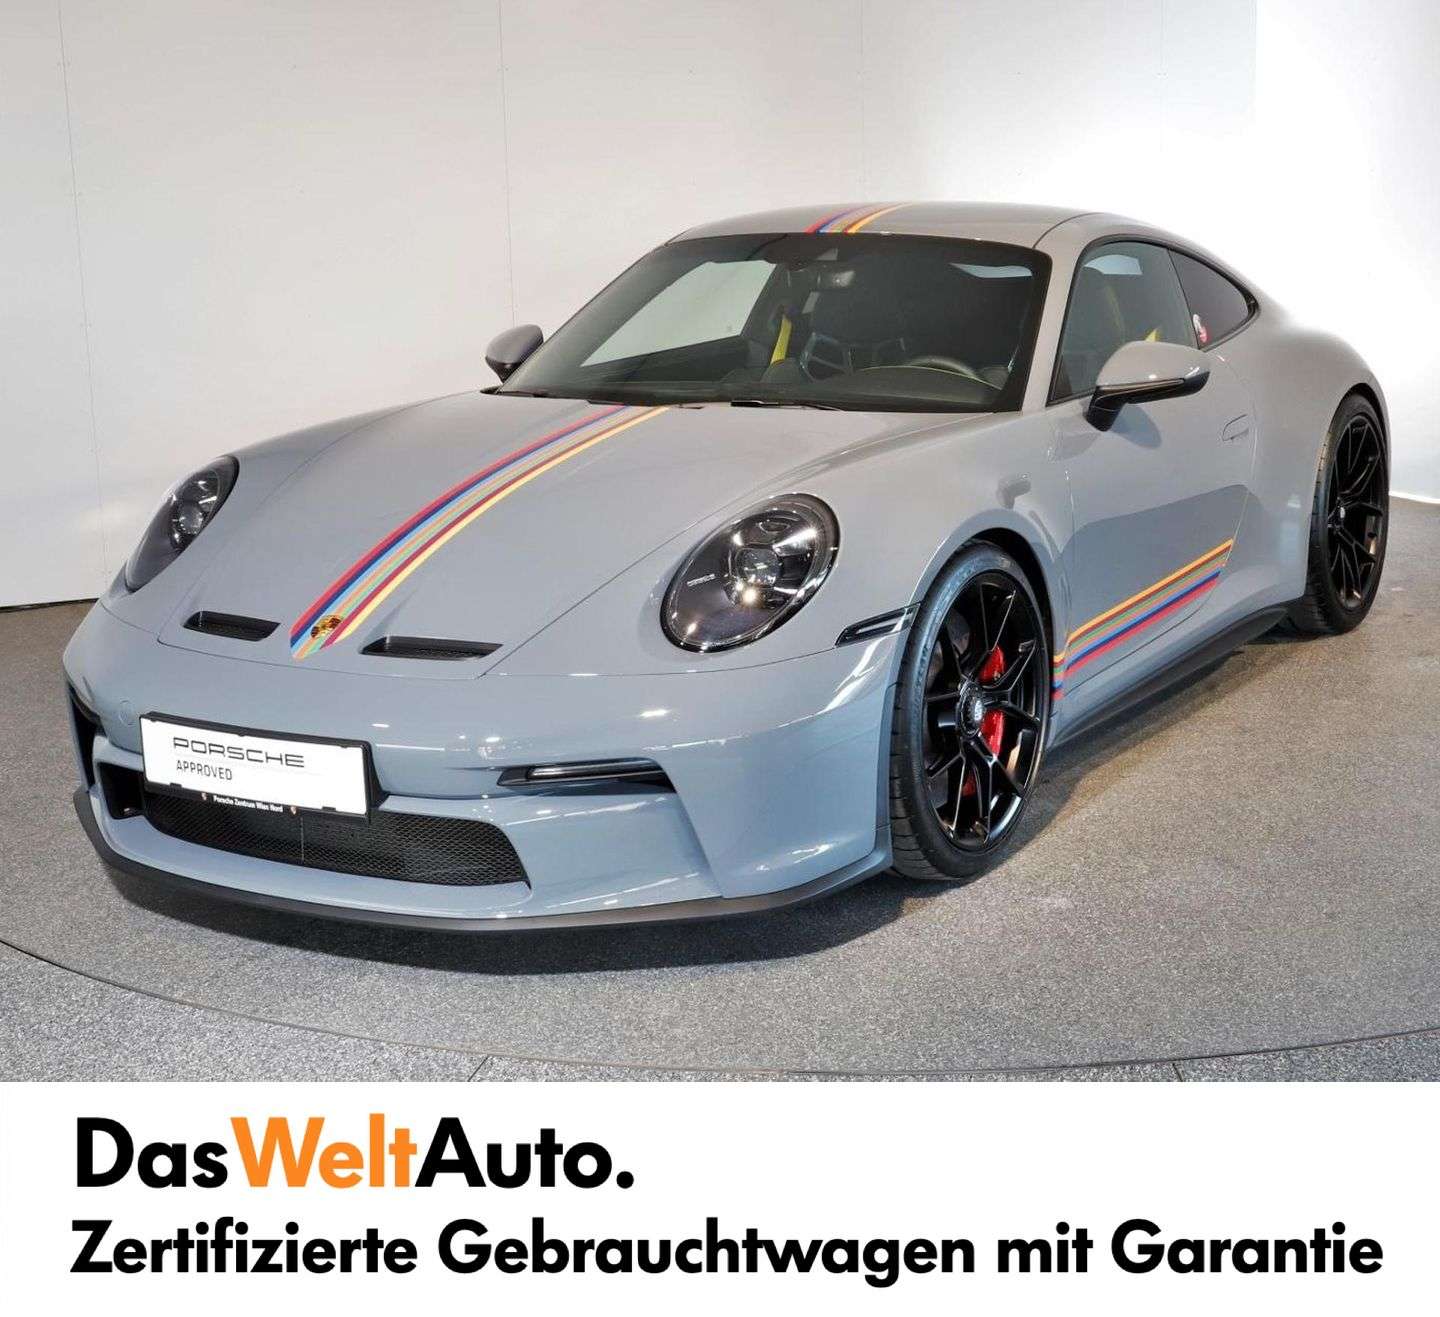 Porsche 911 Coupe in Grey used in Wien for € 280,000.-